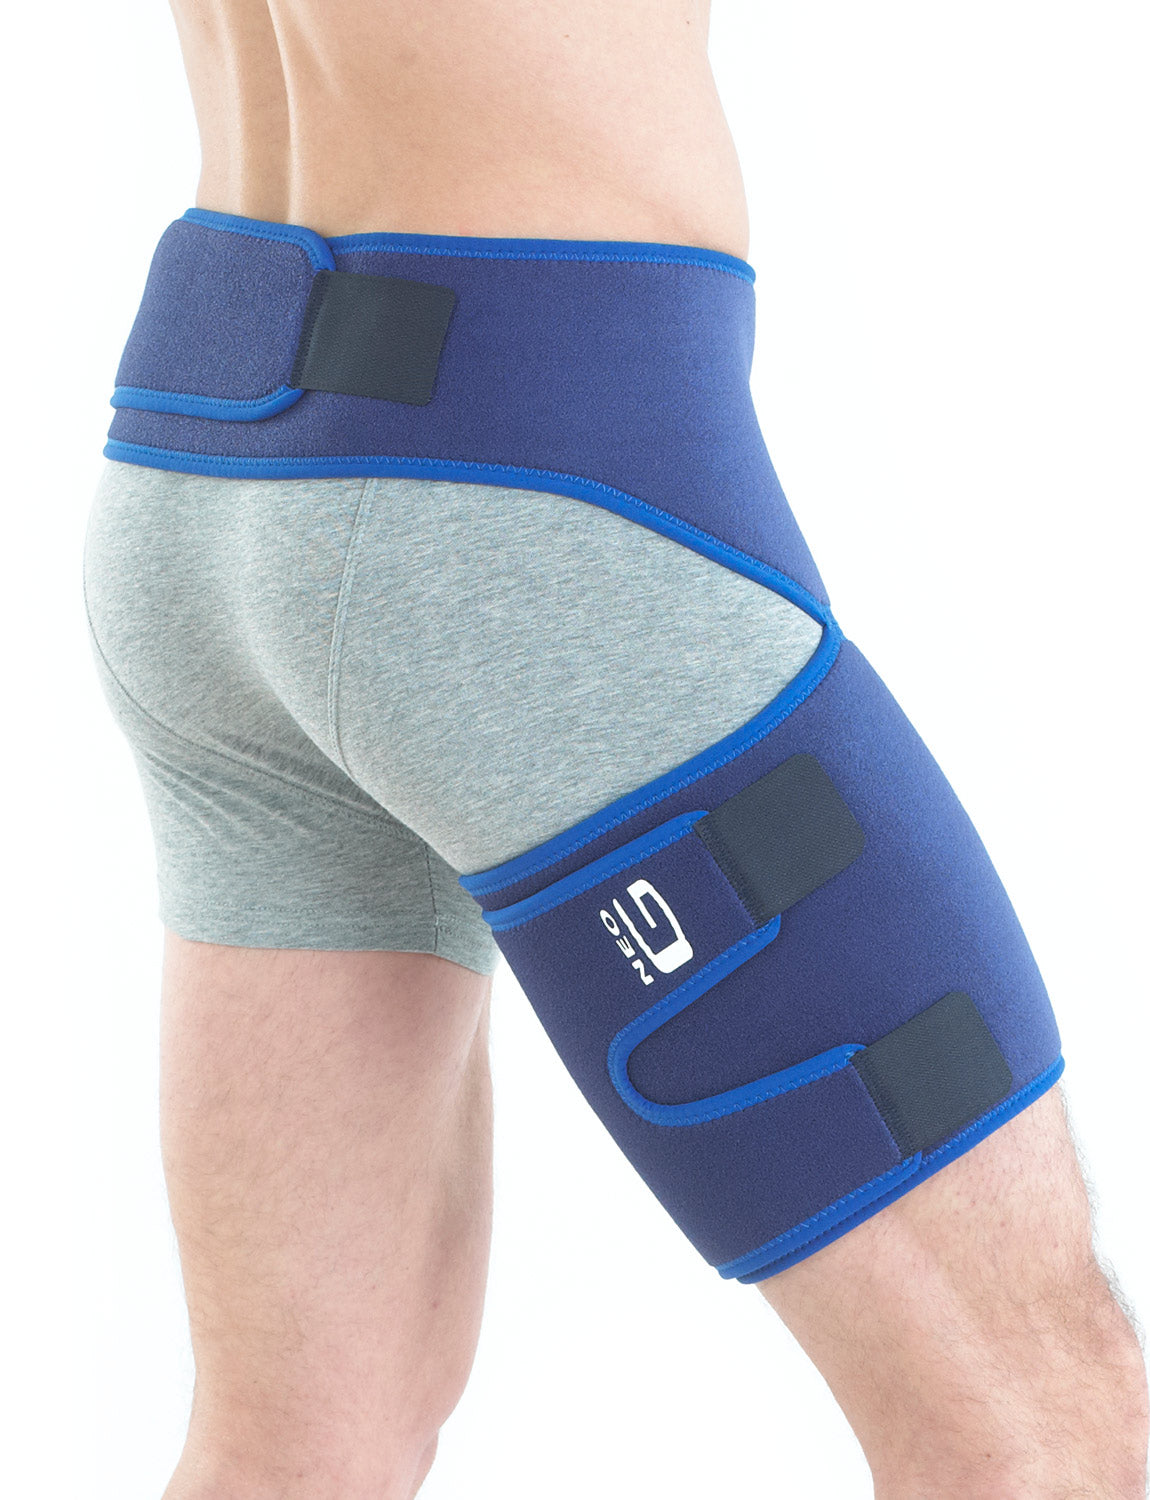  Hamstring Compression Sleeve Recovery Support Non-Slip Groin  Wrap For Adductor Tendonitis